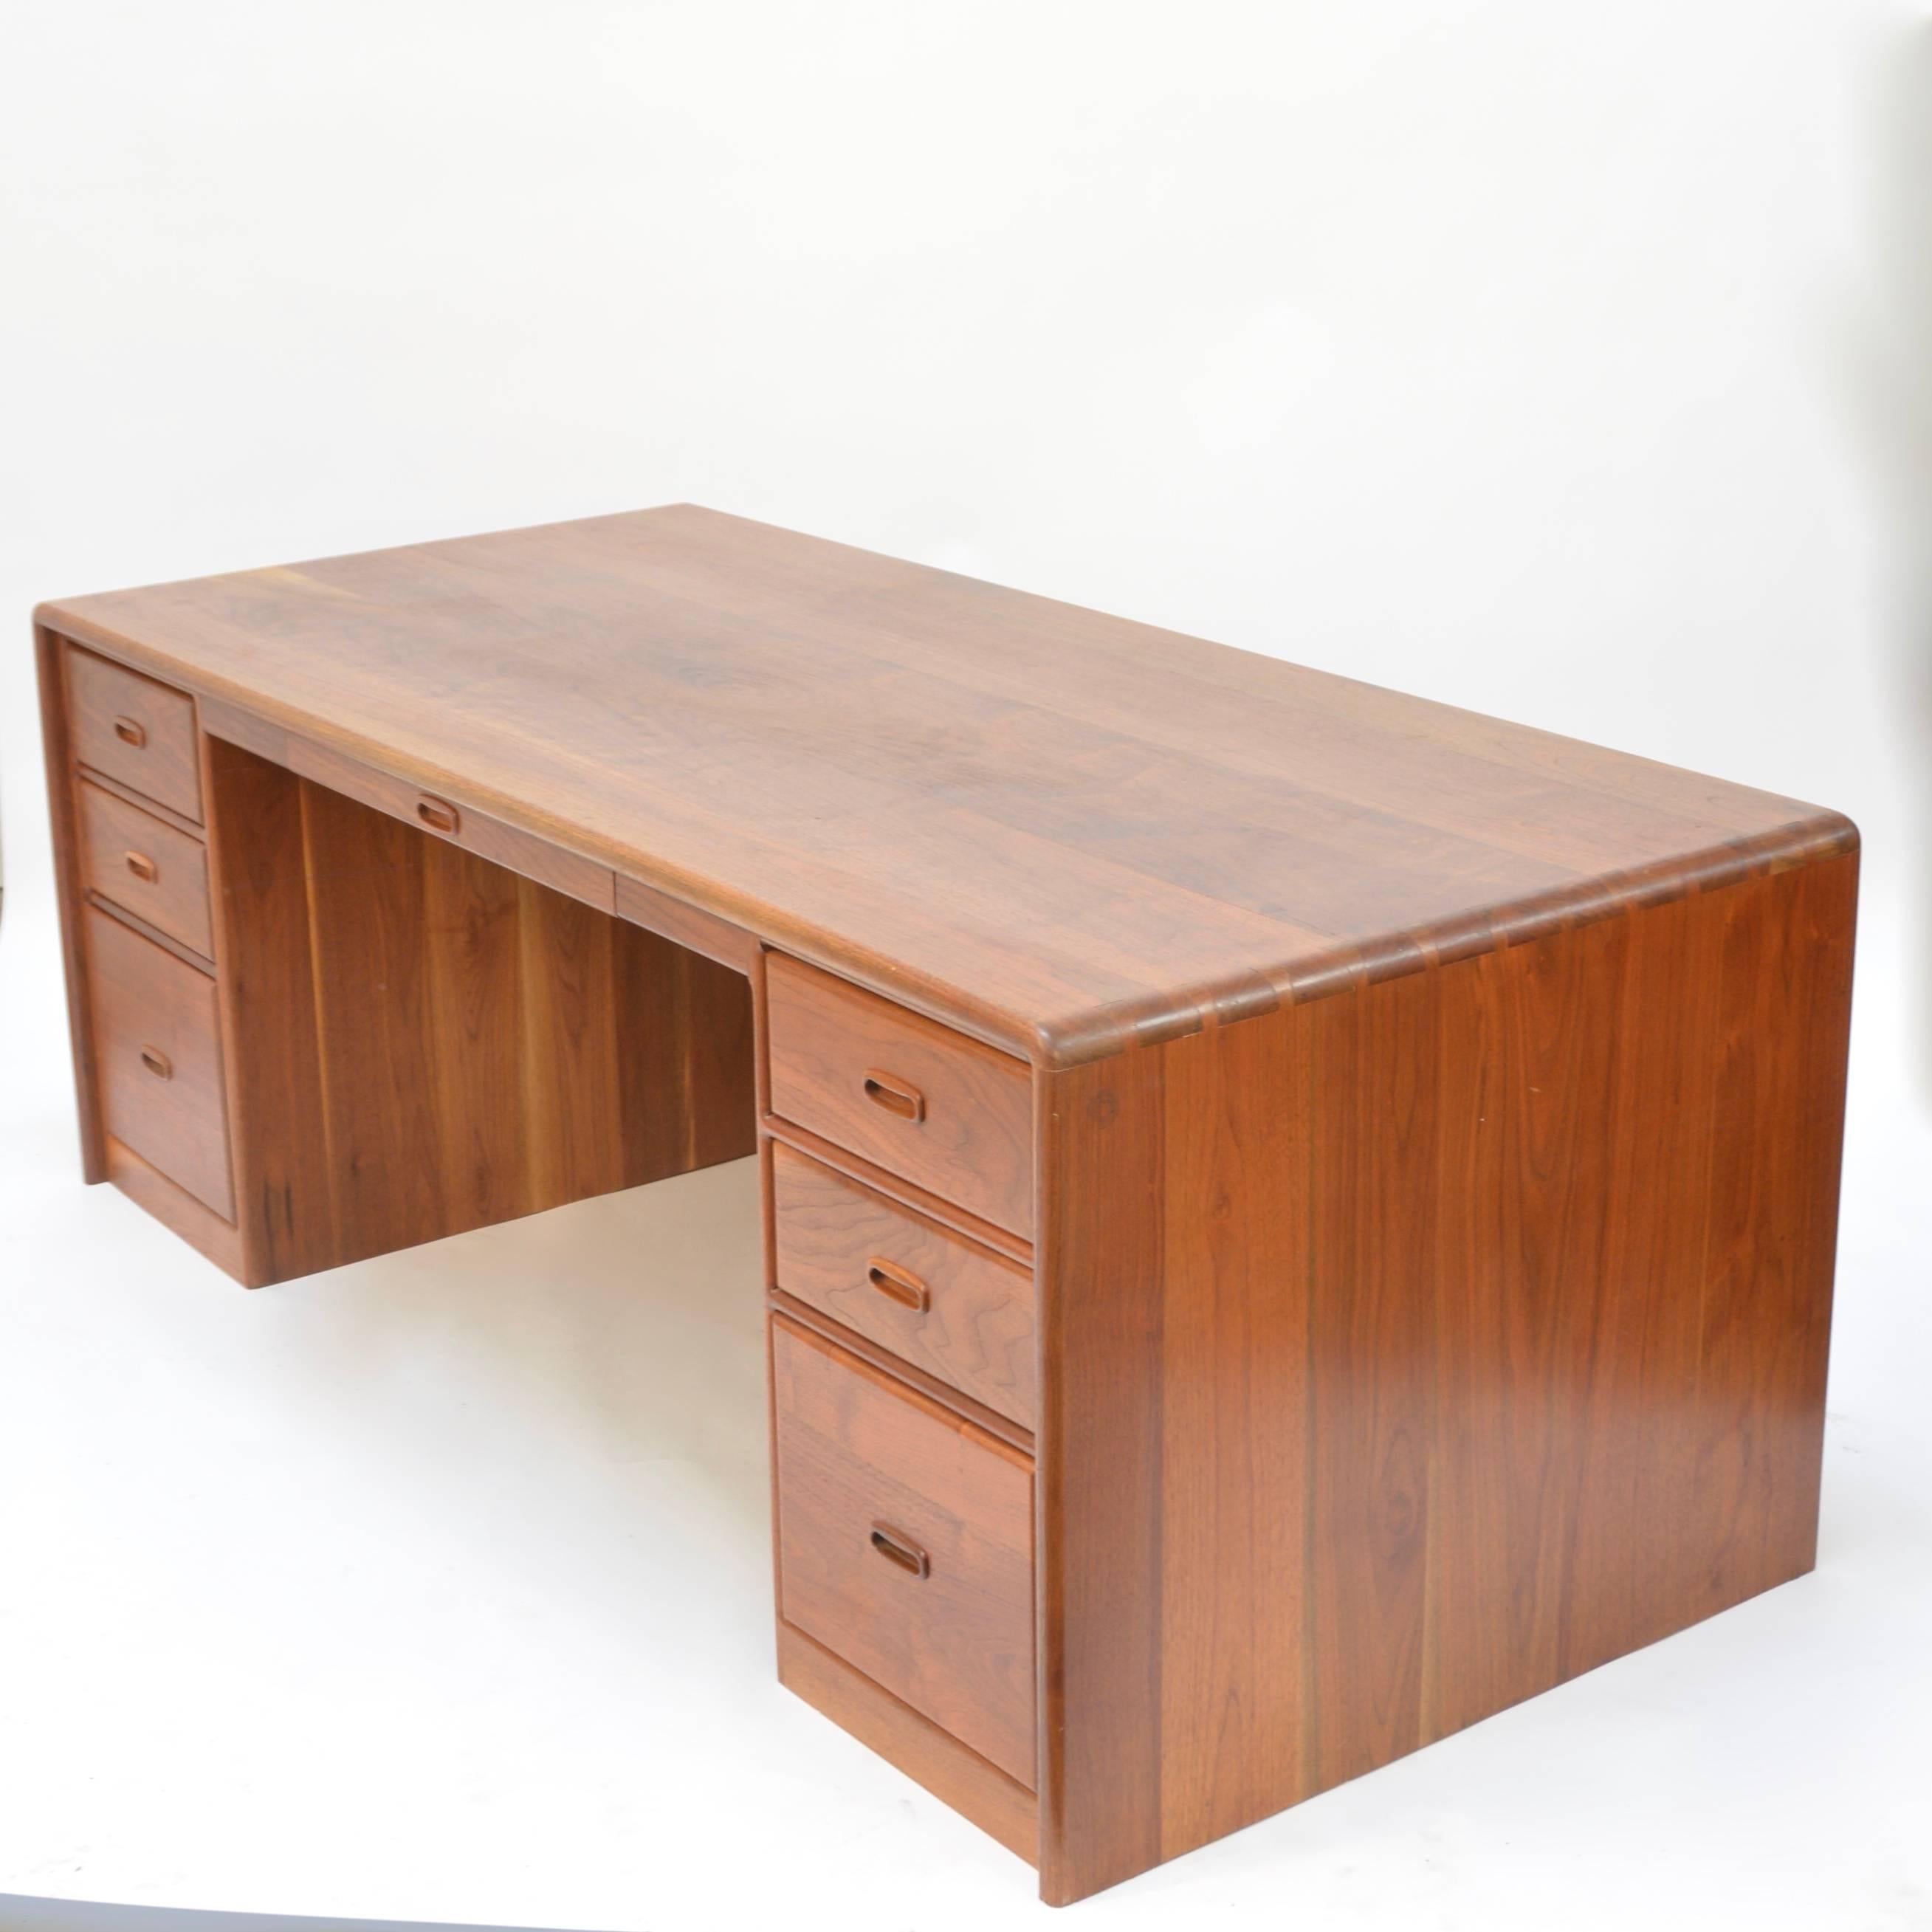 This is a custom handcrafted executive desk by Ed Rizzardi of Los Angeles. The desk features solid African walnut construction and beautiful joinery. This piece is in good vintage condition with light wear and some natural wood checking.